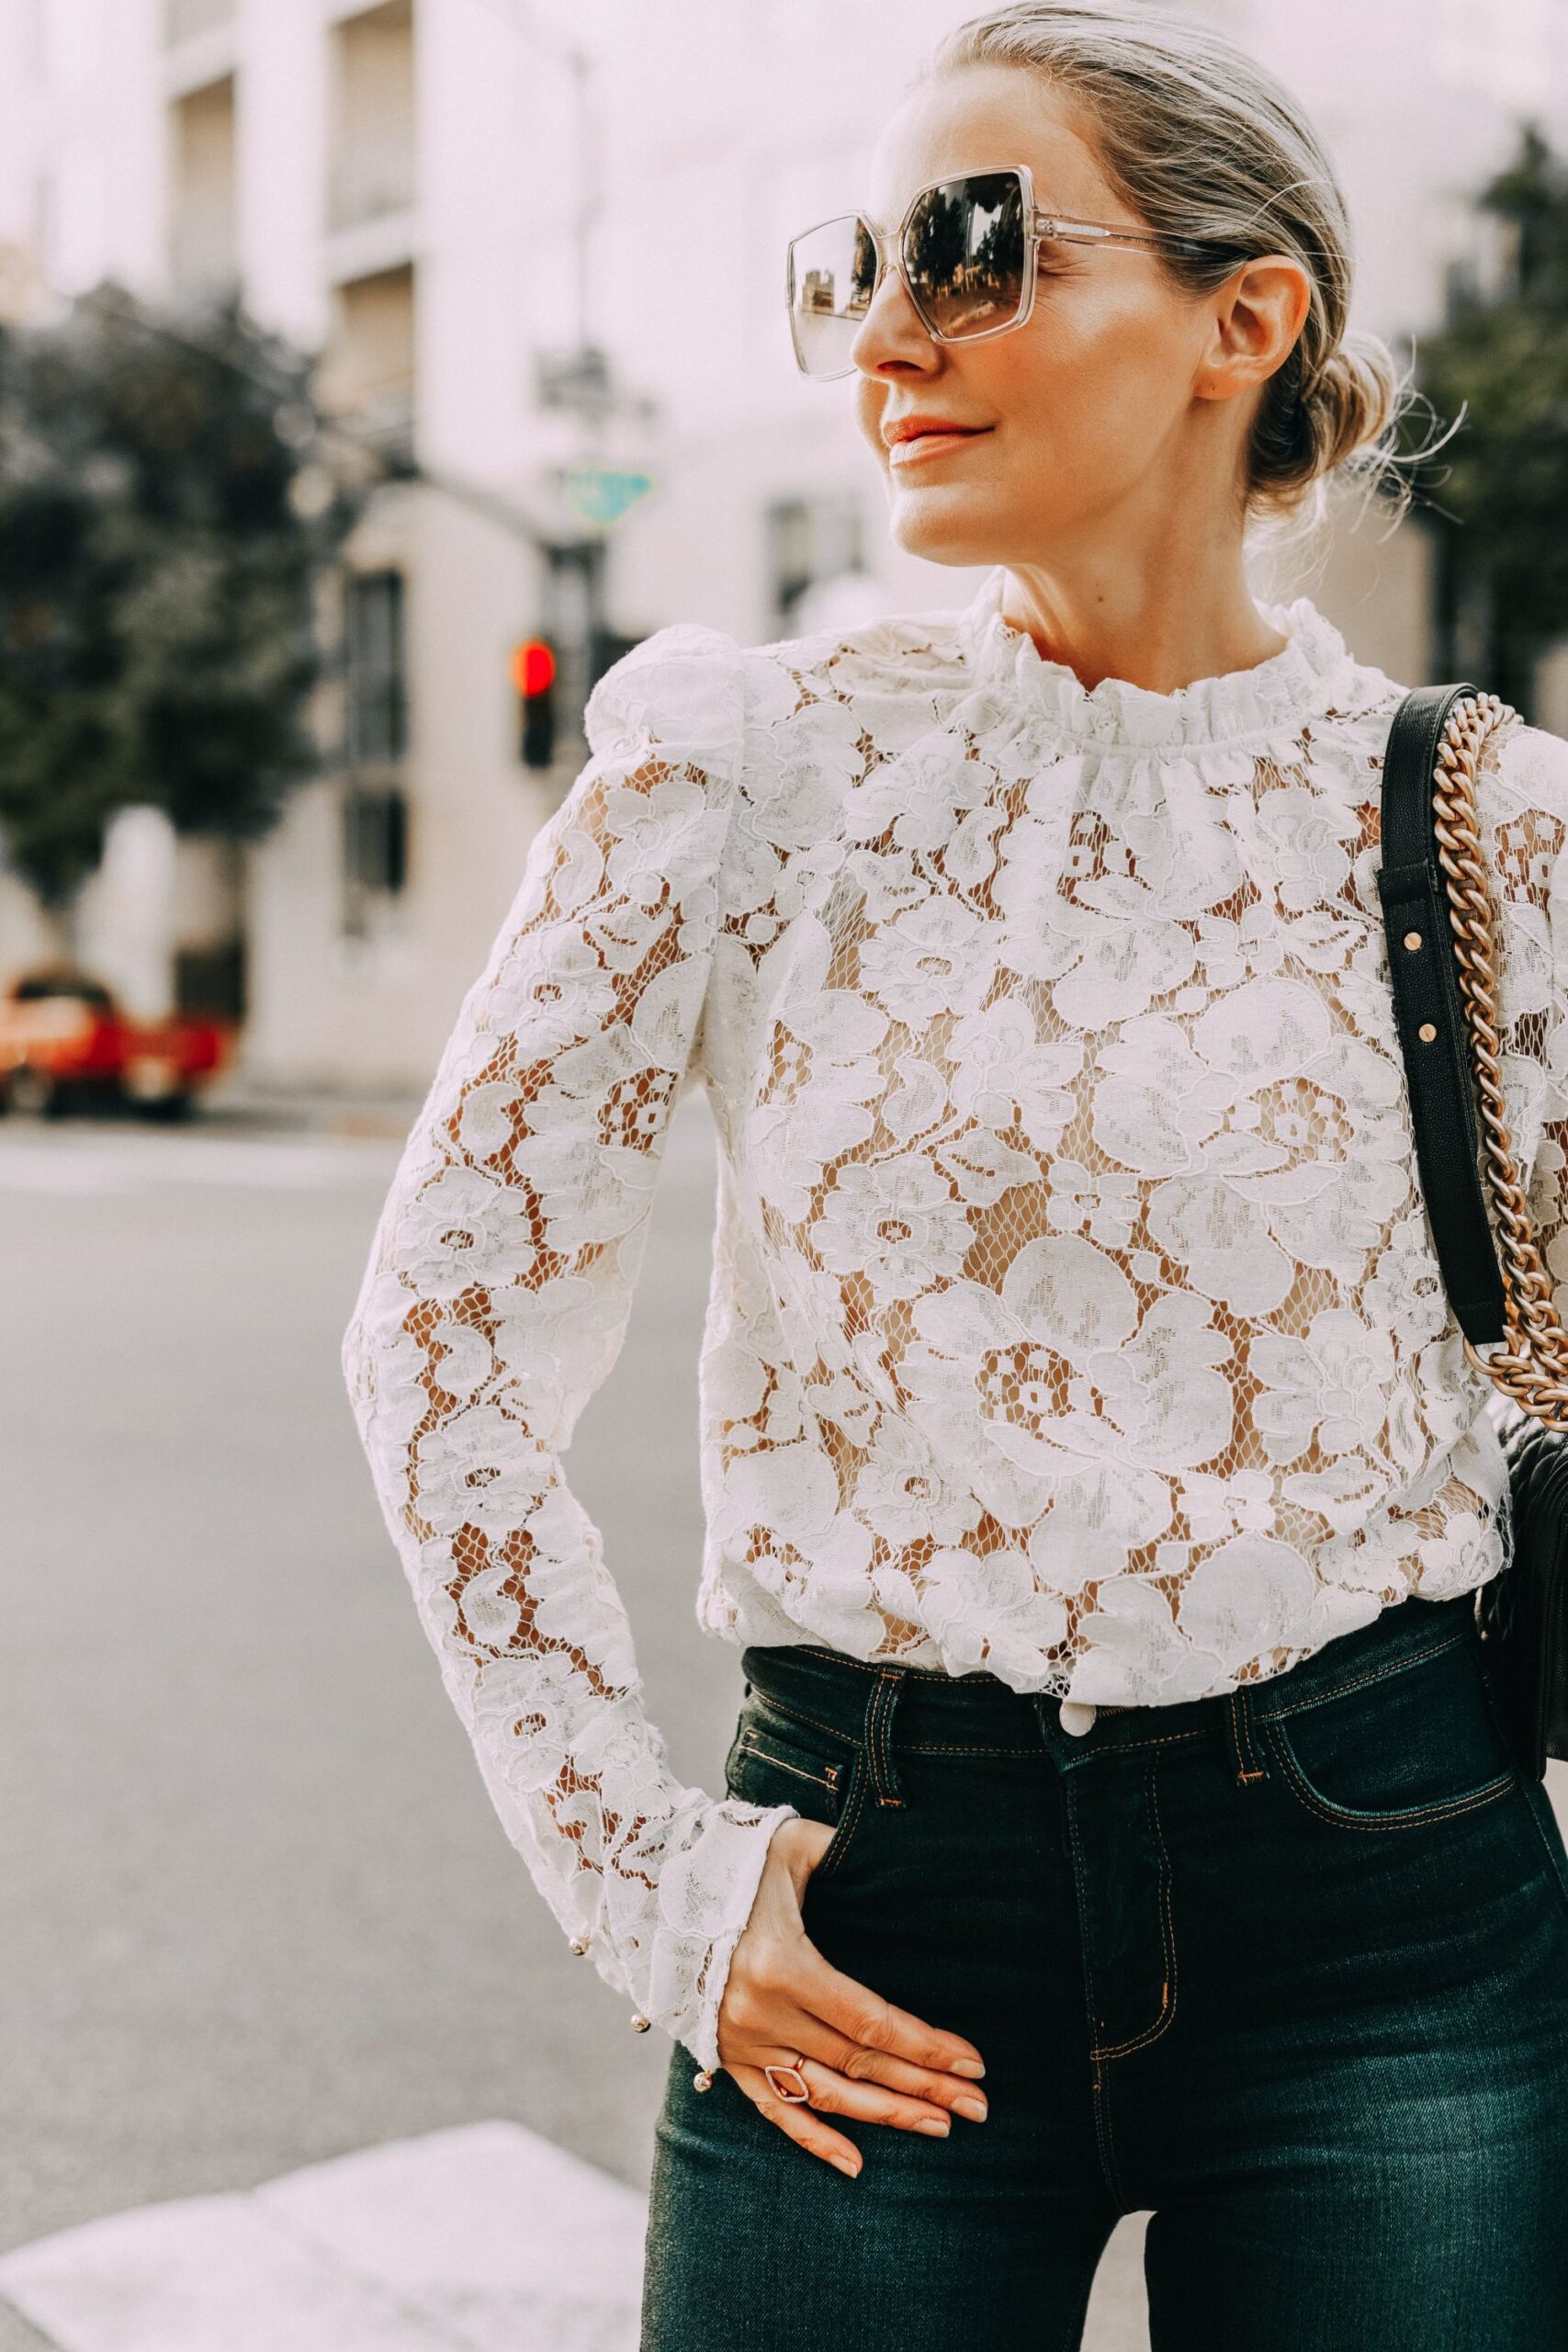 How To Style White Lace Shirt